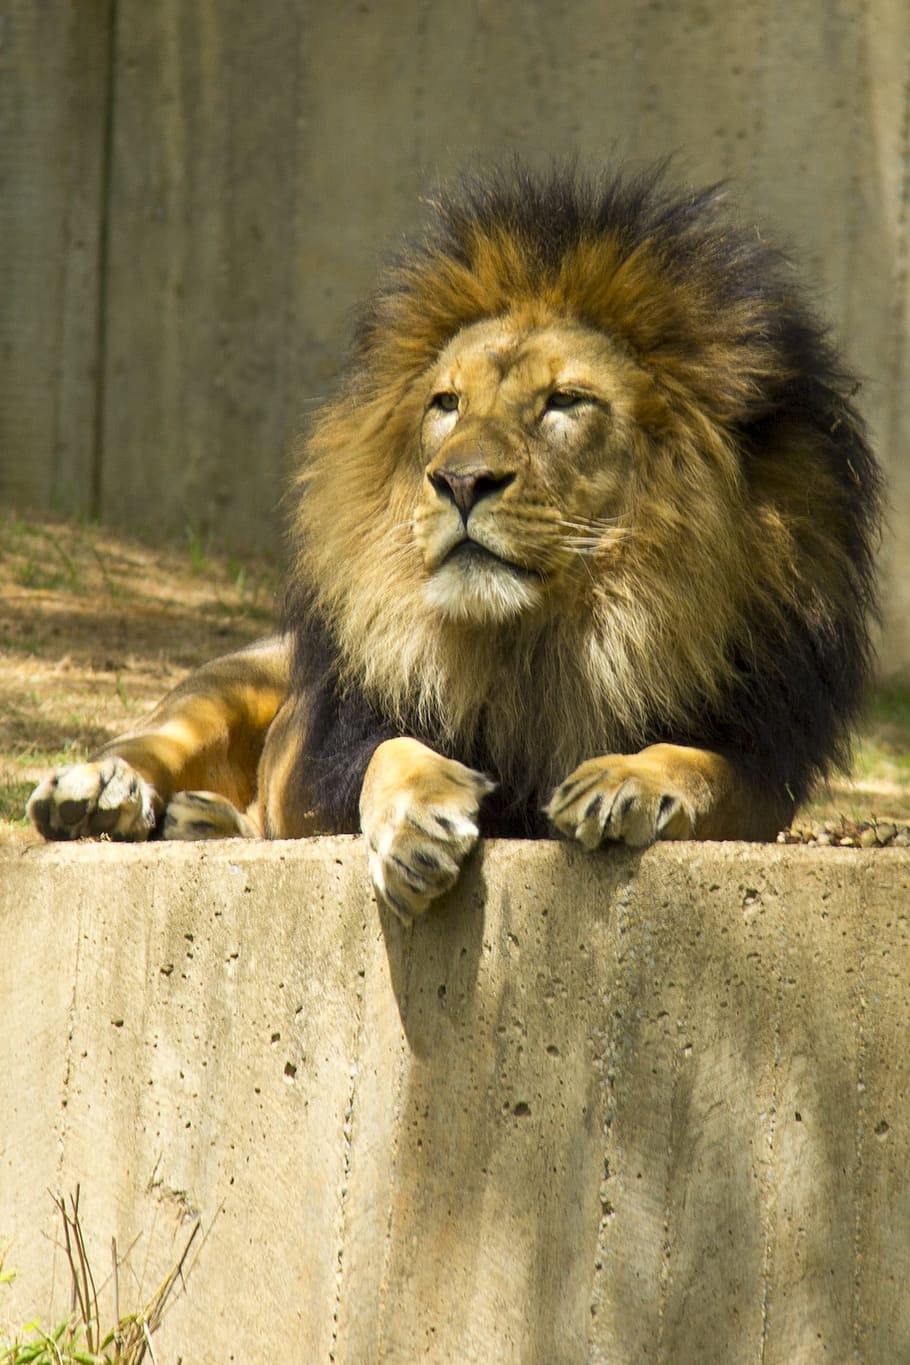 Lion, Zoo, Animal, Down, Proud, laying down, king of the jungle, lion - Feline, wildlife, carnivore